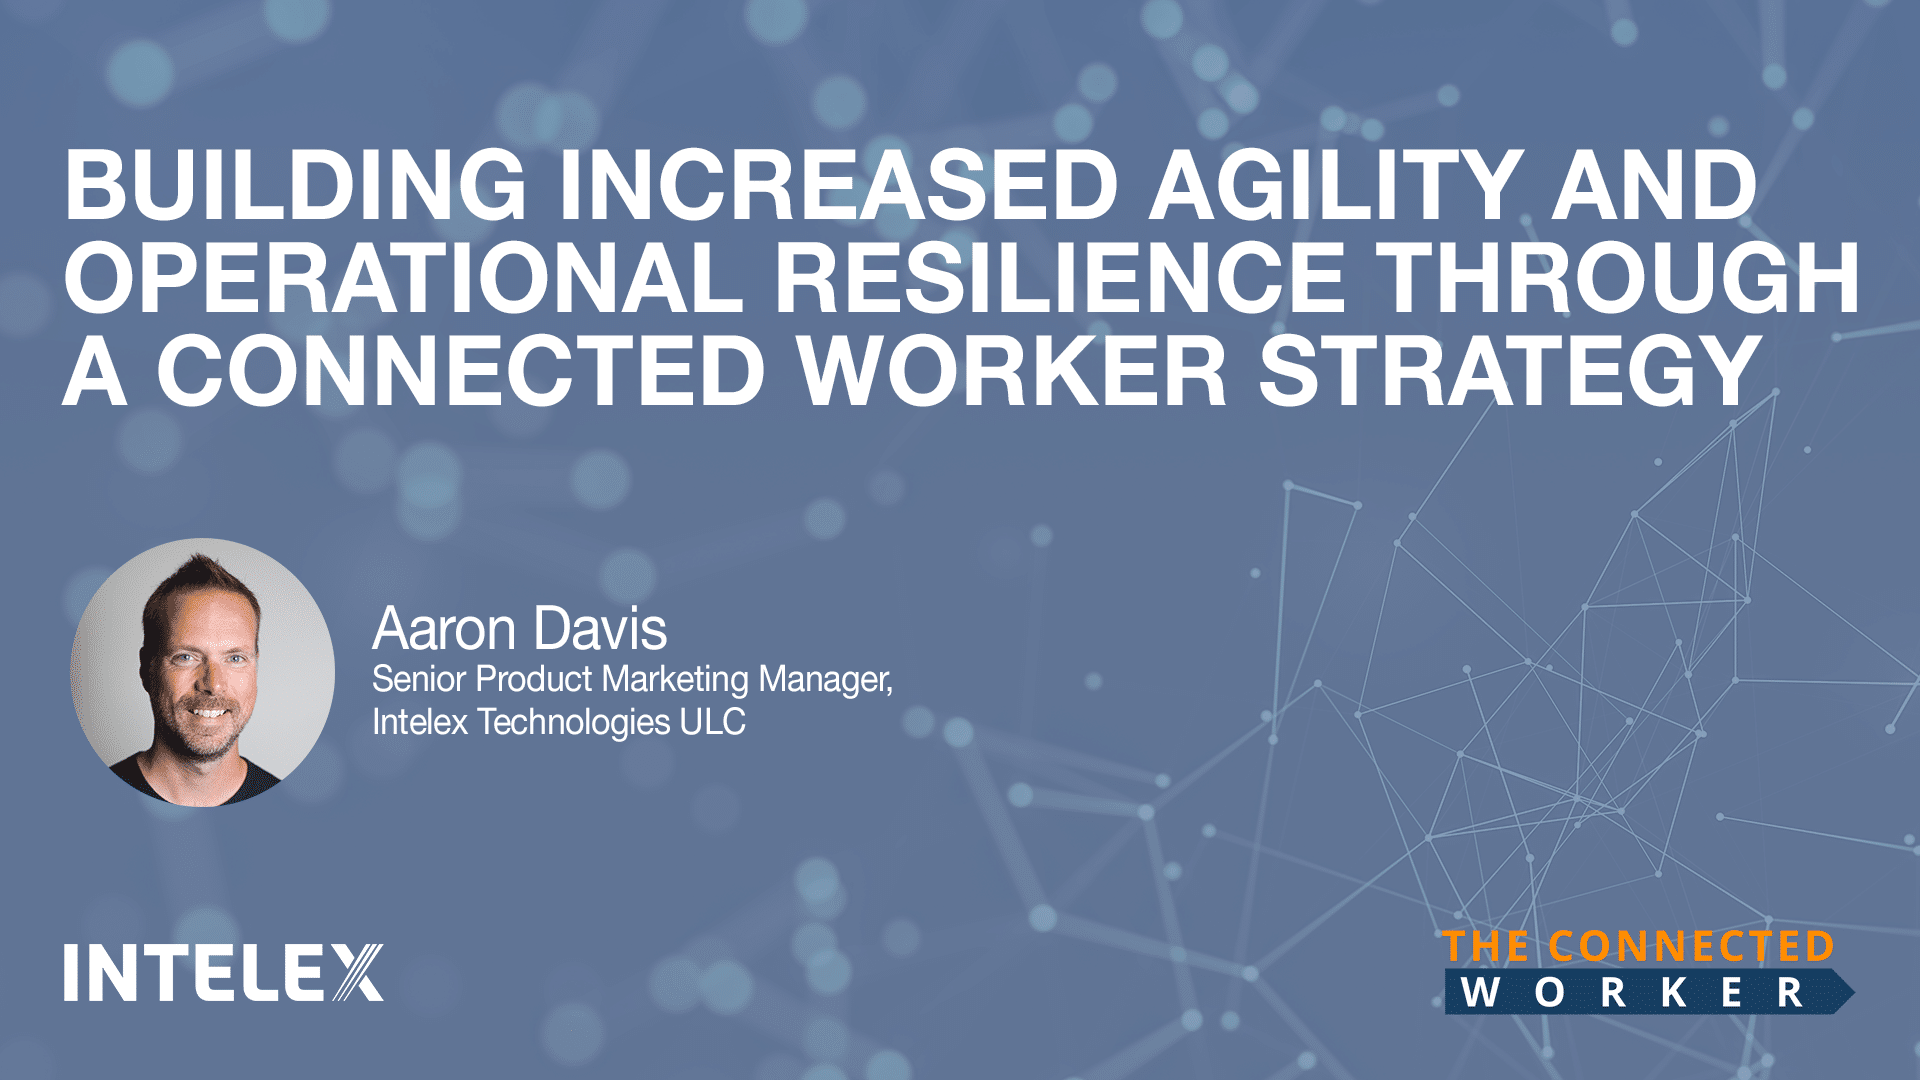 Building Increased Agility and Operational Resilience Through a Connected Worker Strategy